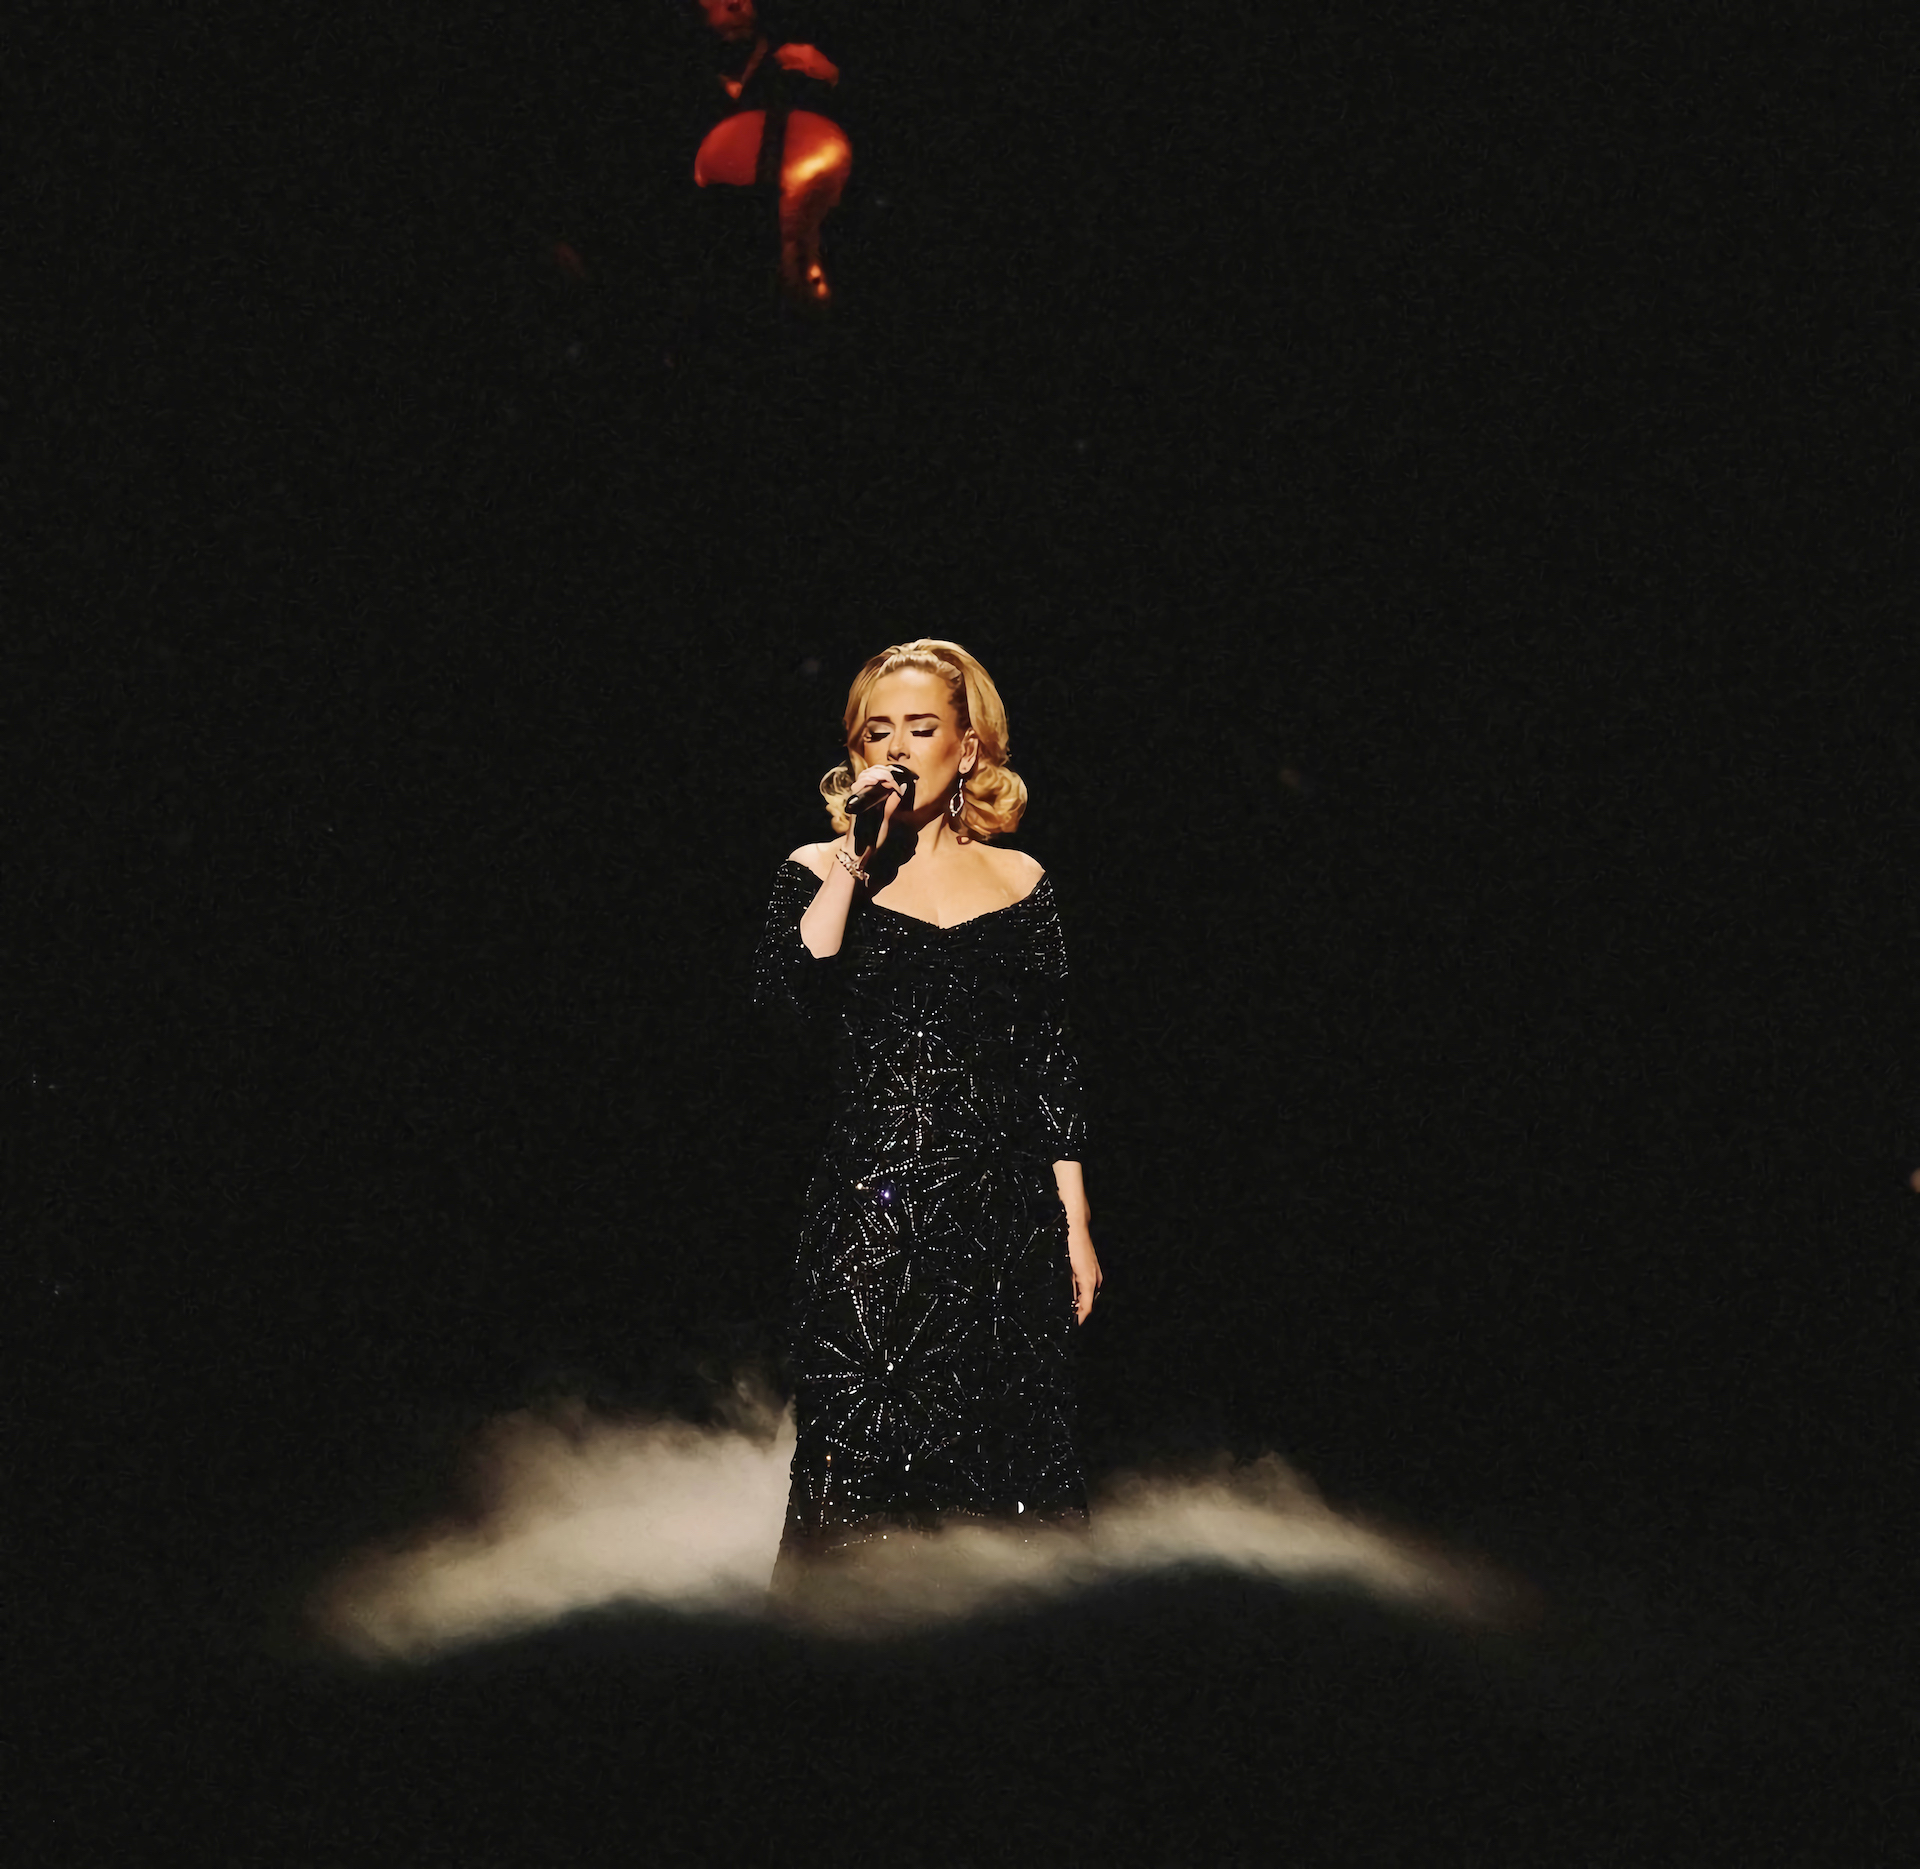 British Grammy-winning singer and songwriter Adele wears a stunning black dress by renowned Vietnamese designer Cong Tri at the ‘Weekends with Adele’ show in Las Vegas, Nevada, the U.S., February 11, 2023. Photo: Cong Tri